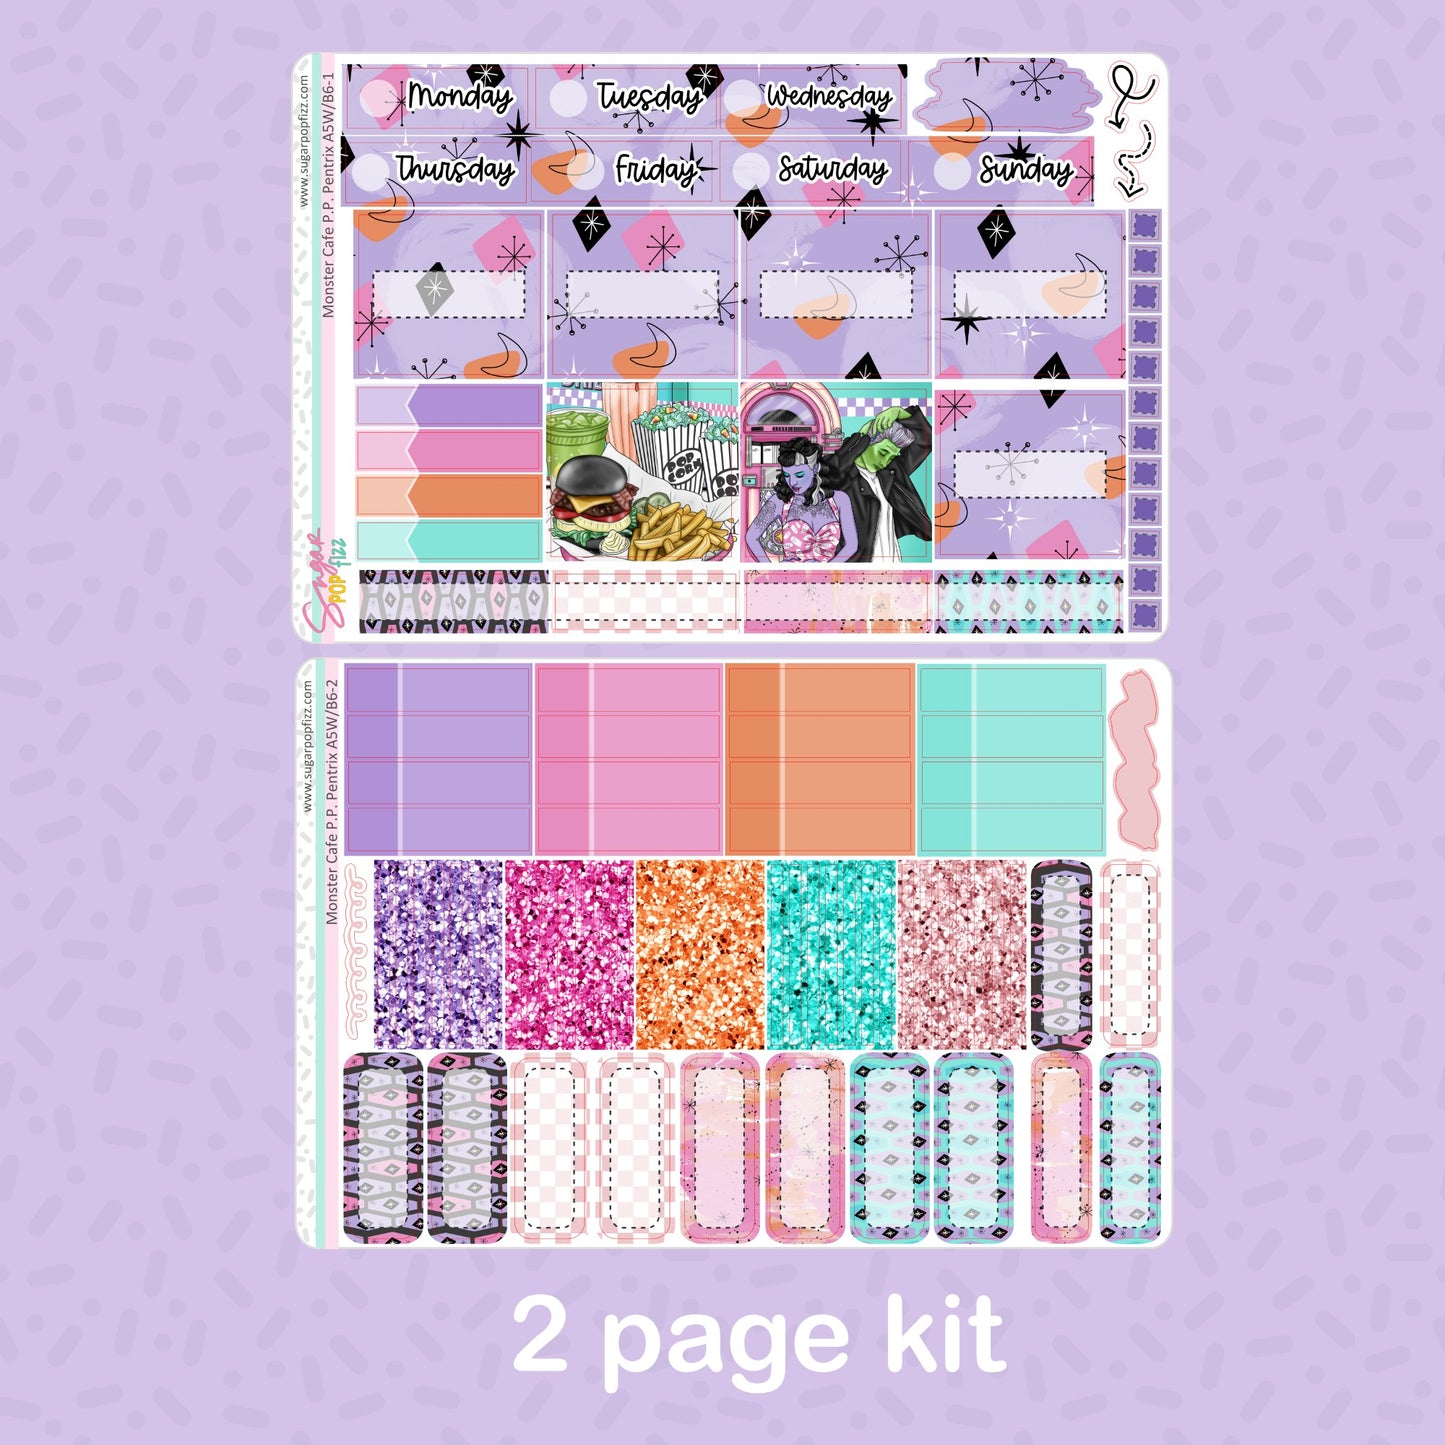 Monster Cafe Penny Pages Pentrix Weekly Kit